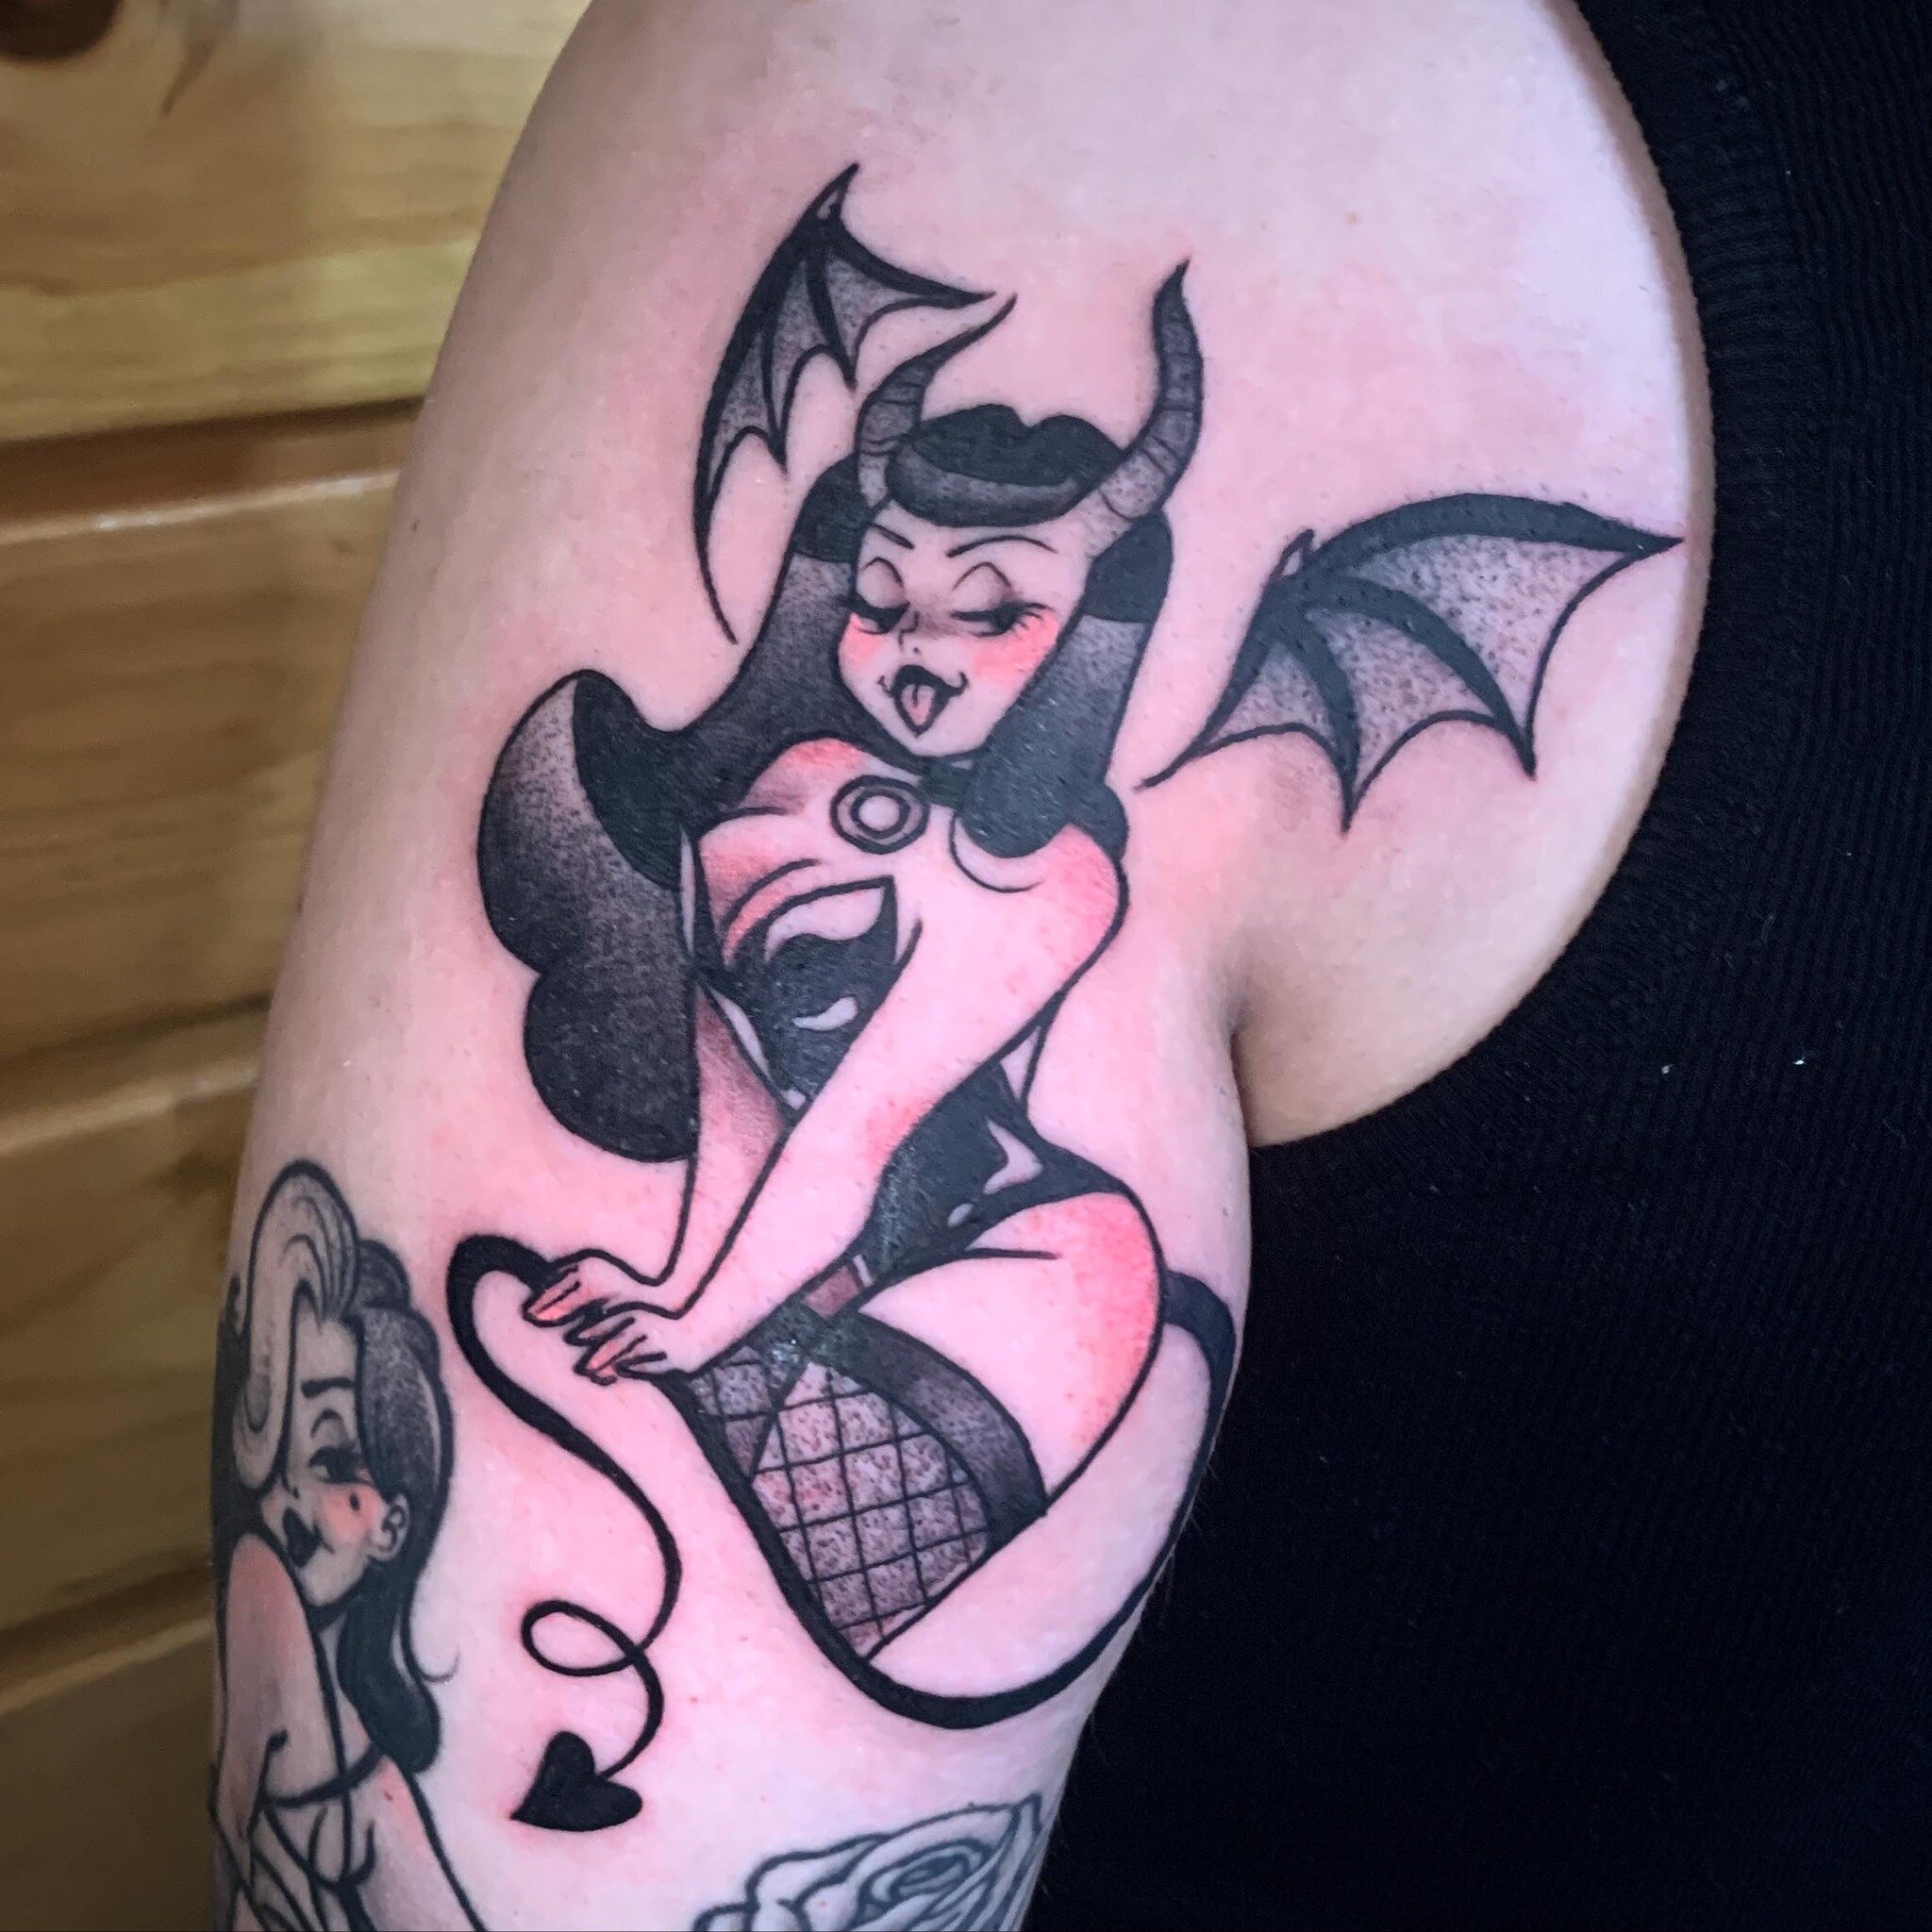 Devil babe! 😈😈😈
Done at @vilainstattoo 
.
.
.
***I&rsquo;m only designing tattoos for people who can come to Montreal to get the tattoo. I won&rsquo;t answer messages otherwise. Please don&rsquo;t use my art without my consent.*** *I do not tattoo